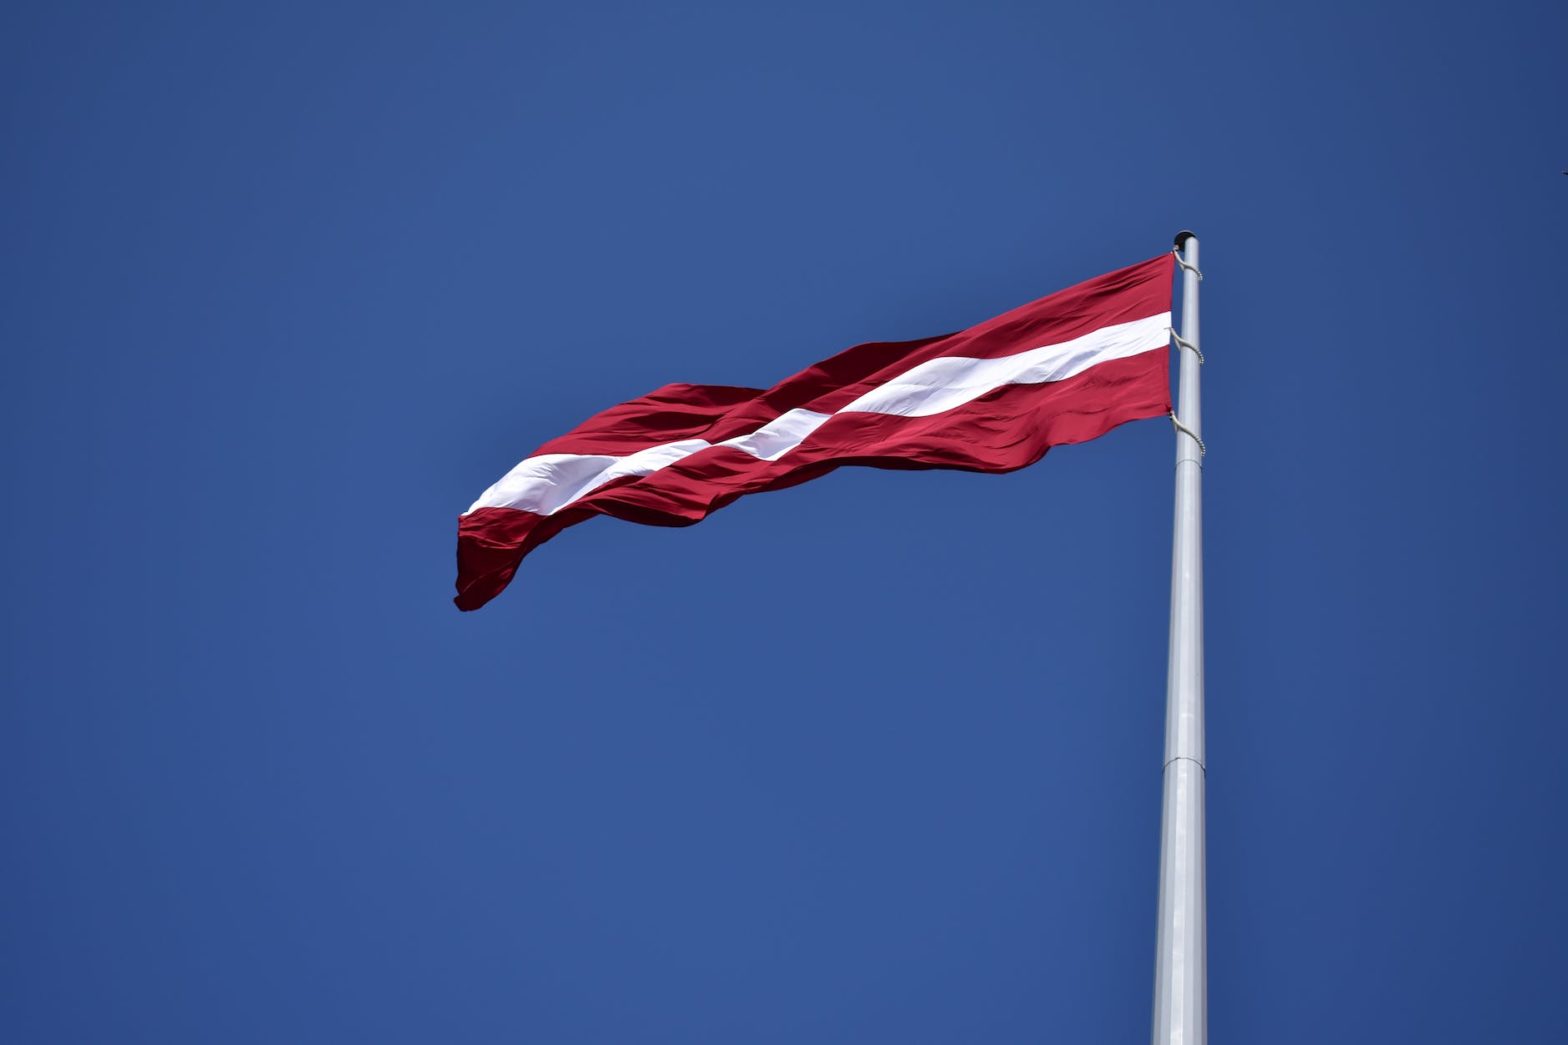 red and white state flag waving under blue sky at daytime